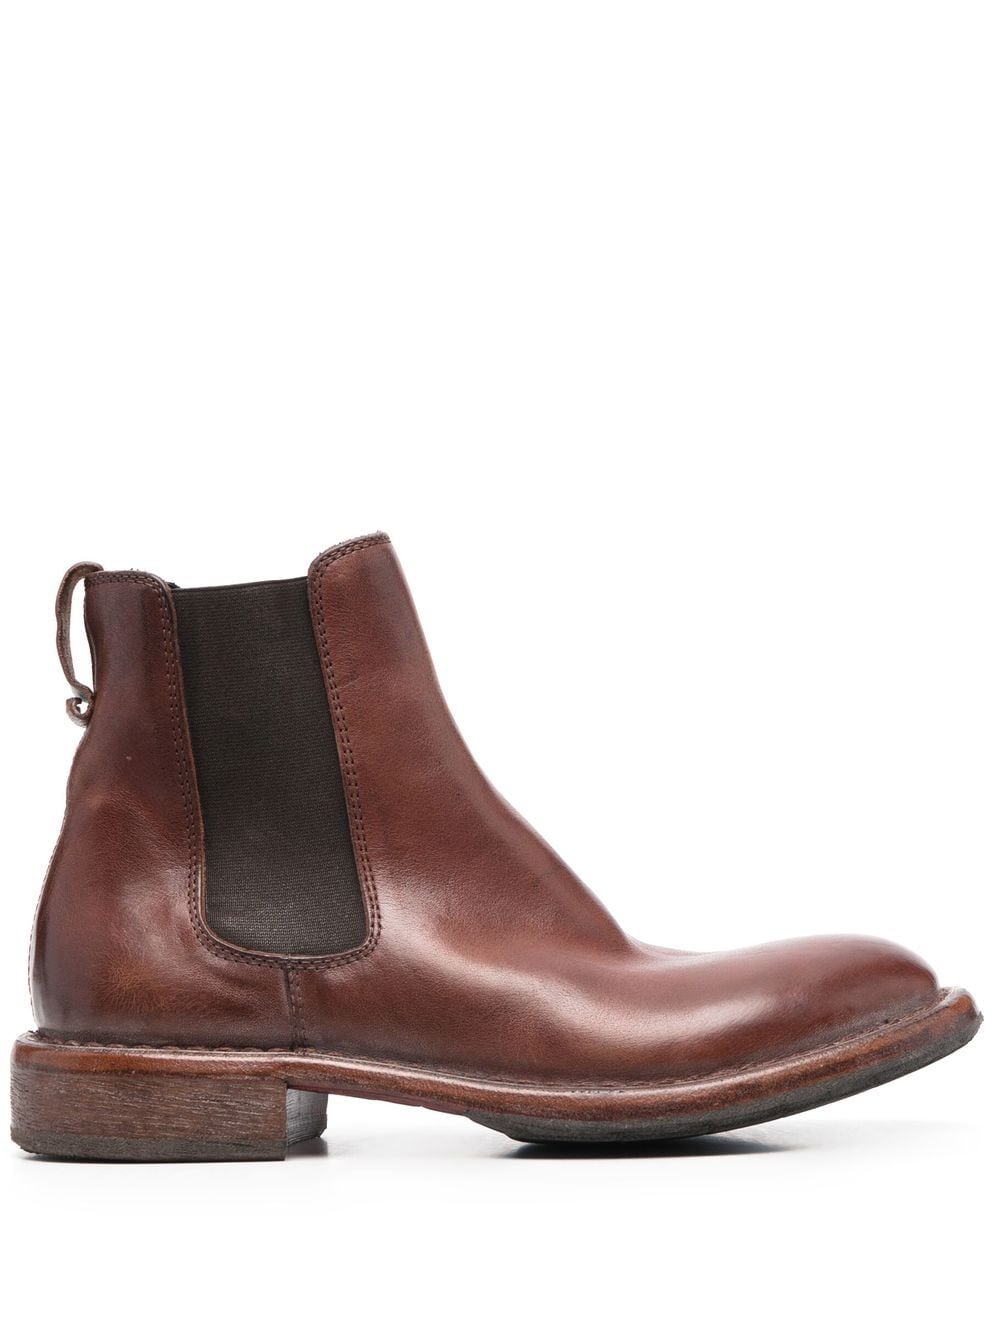 Moma leather ankle boots - Brown von Moma